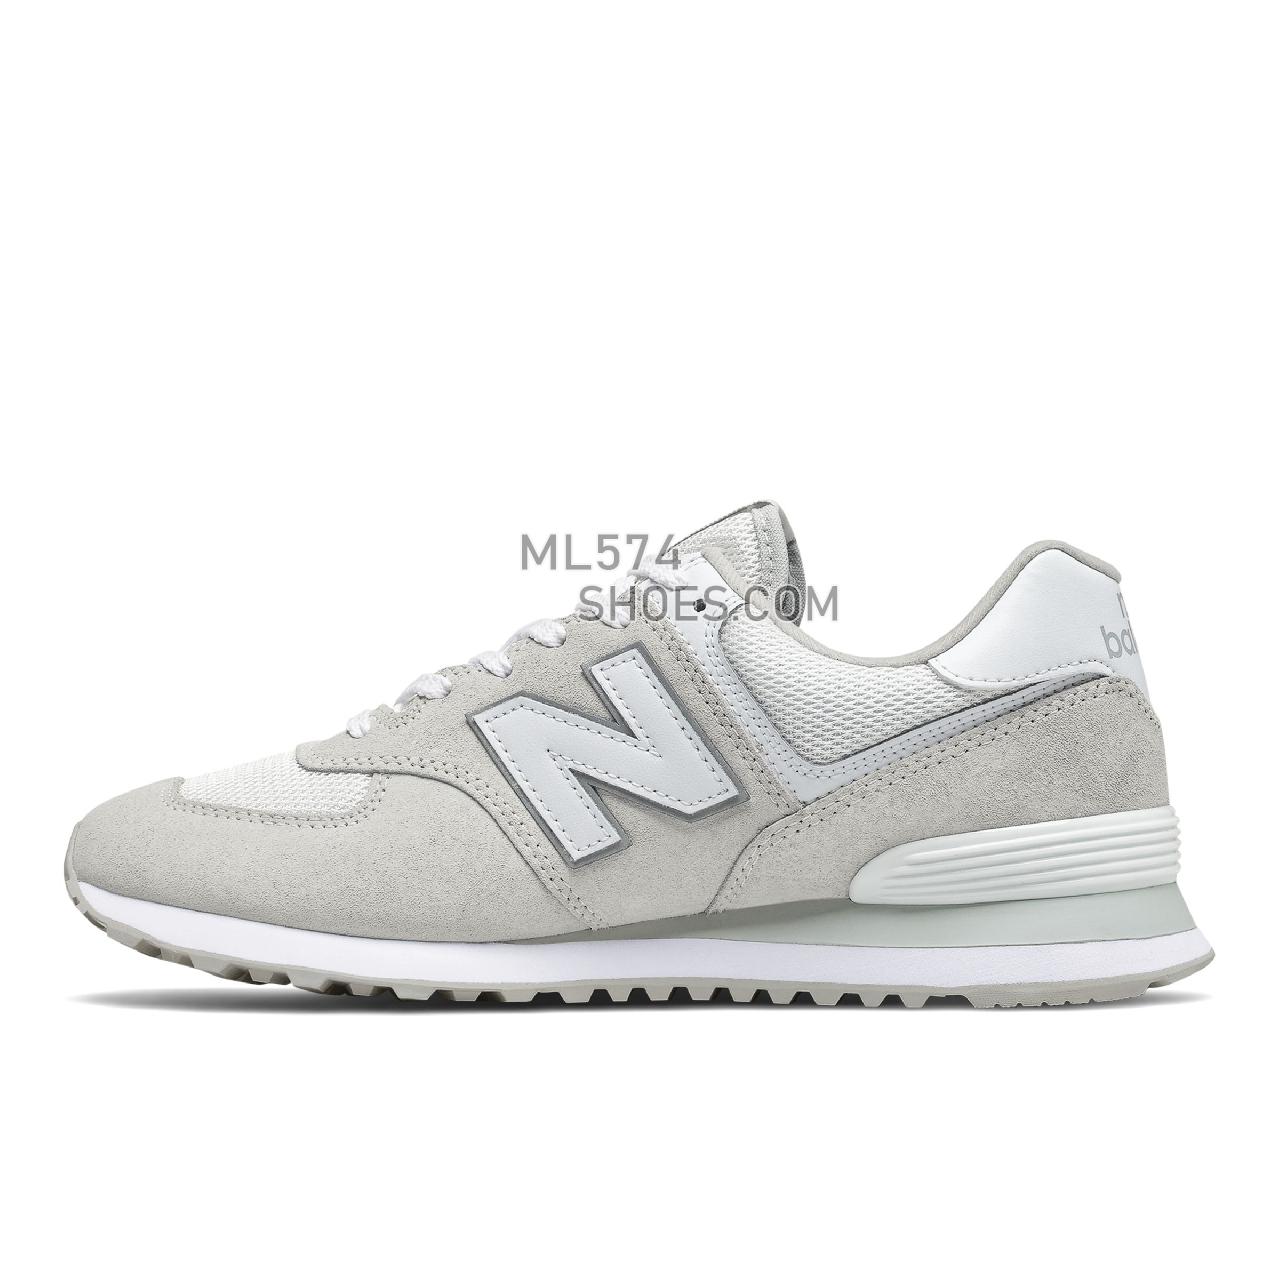 New Balance 574v2 - Men's Classic Sneakers - Summer Fog with White - ML574ES2